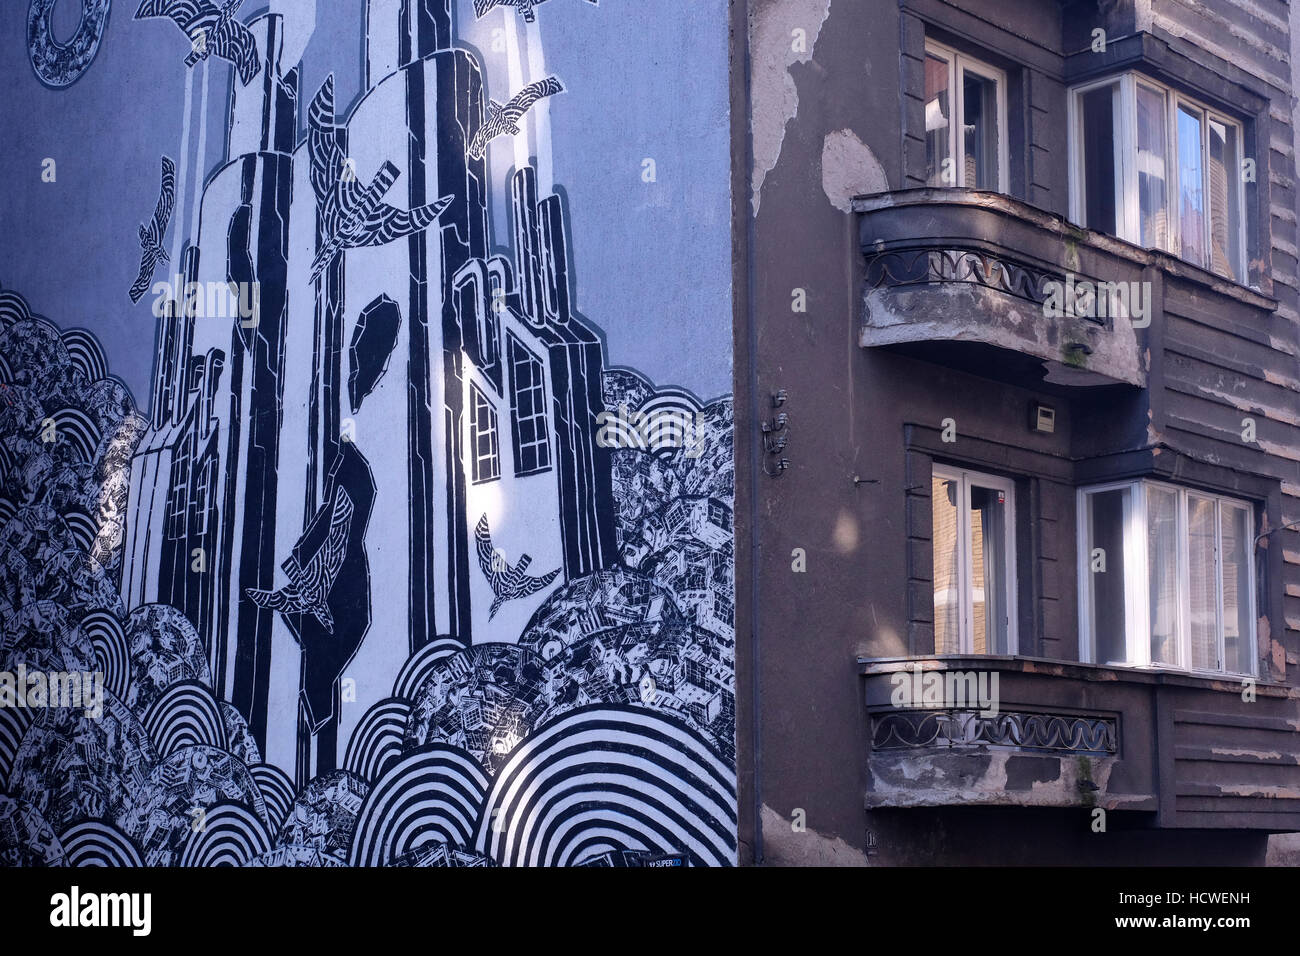 A painted wall at the facade of a building in the city center of Belgrade capital of the Republic of Serbia Stock Photo